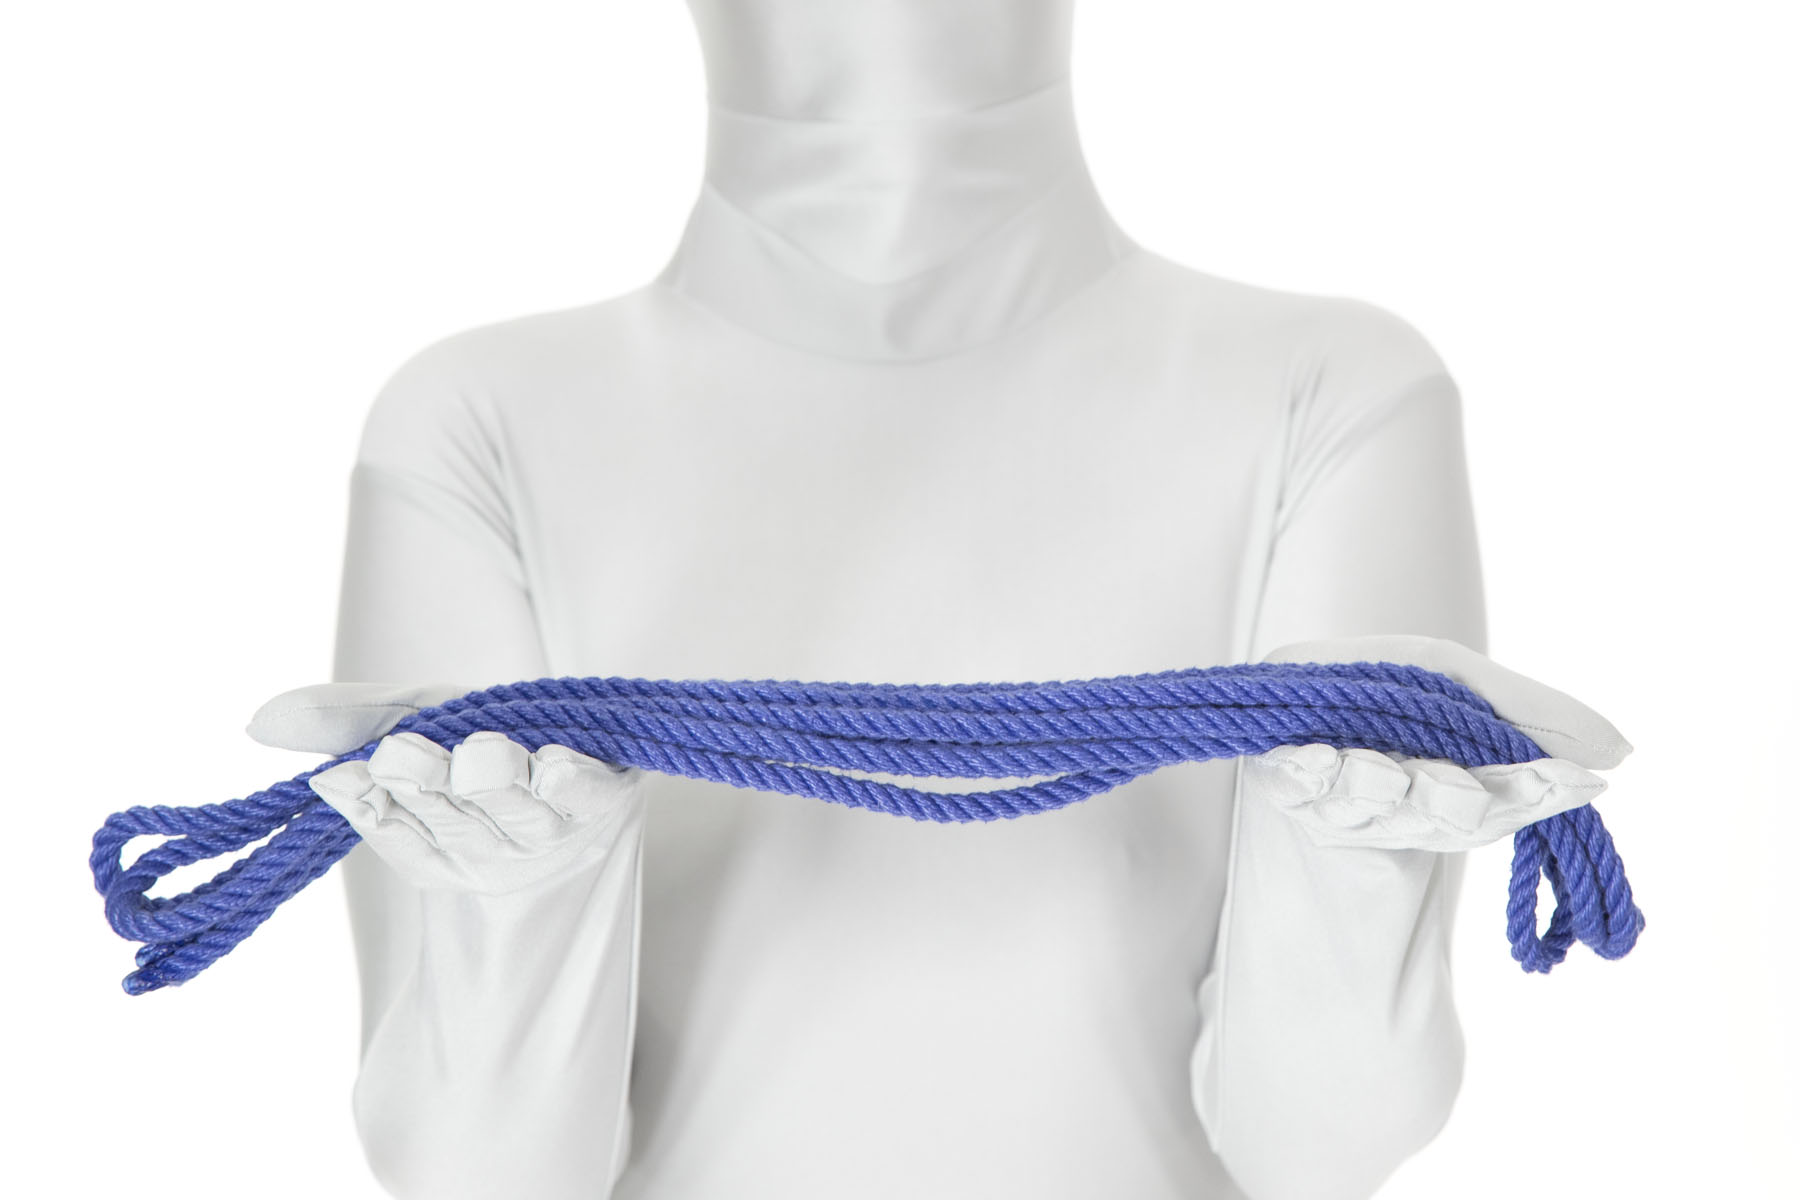 A person holding up a blue rope. The rope has been folded in half three times, so it is about two feel long and has eight strands of rope running between the two hands.